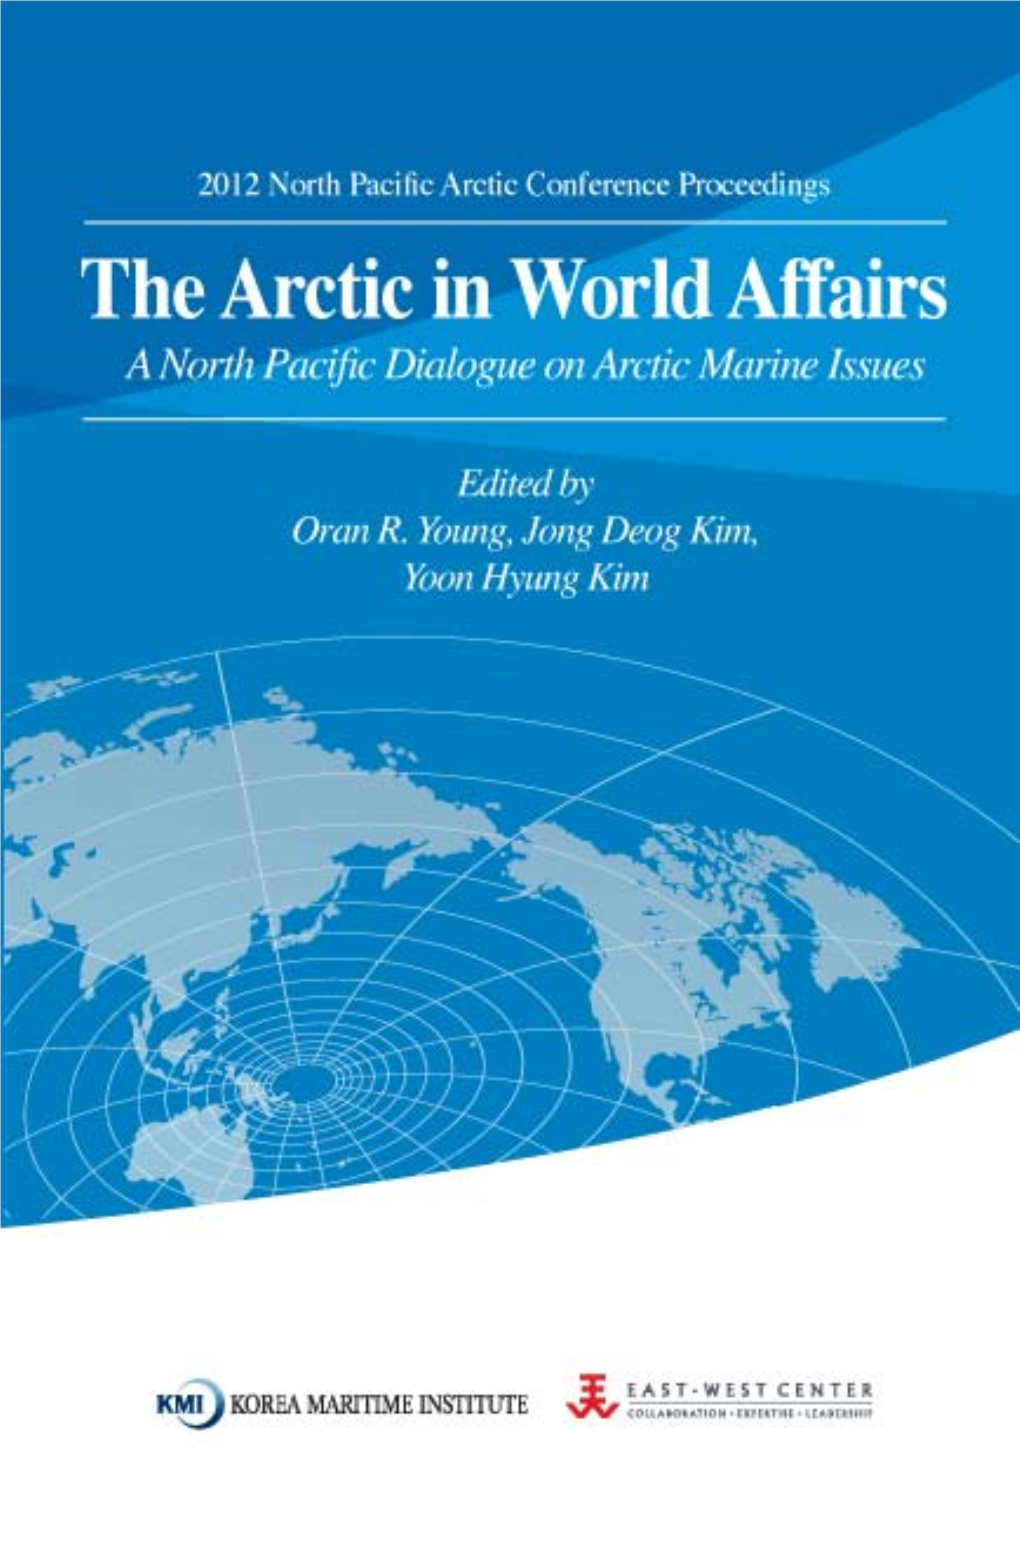 The Arctic in World Affairs